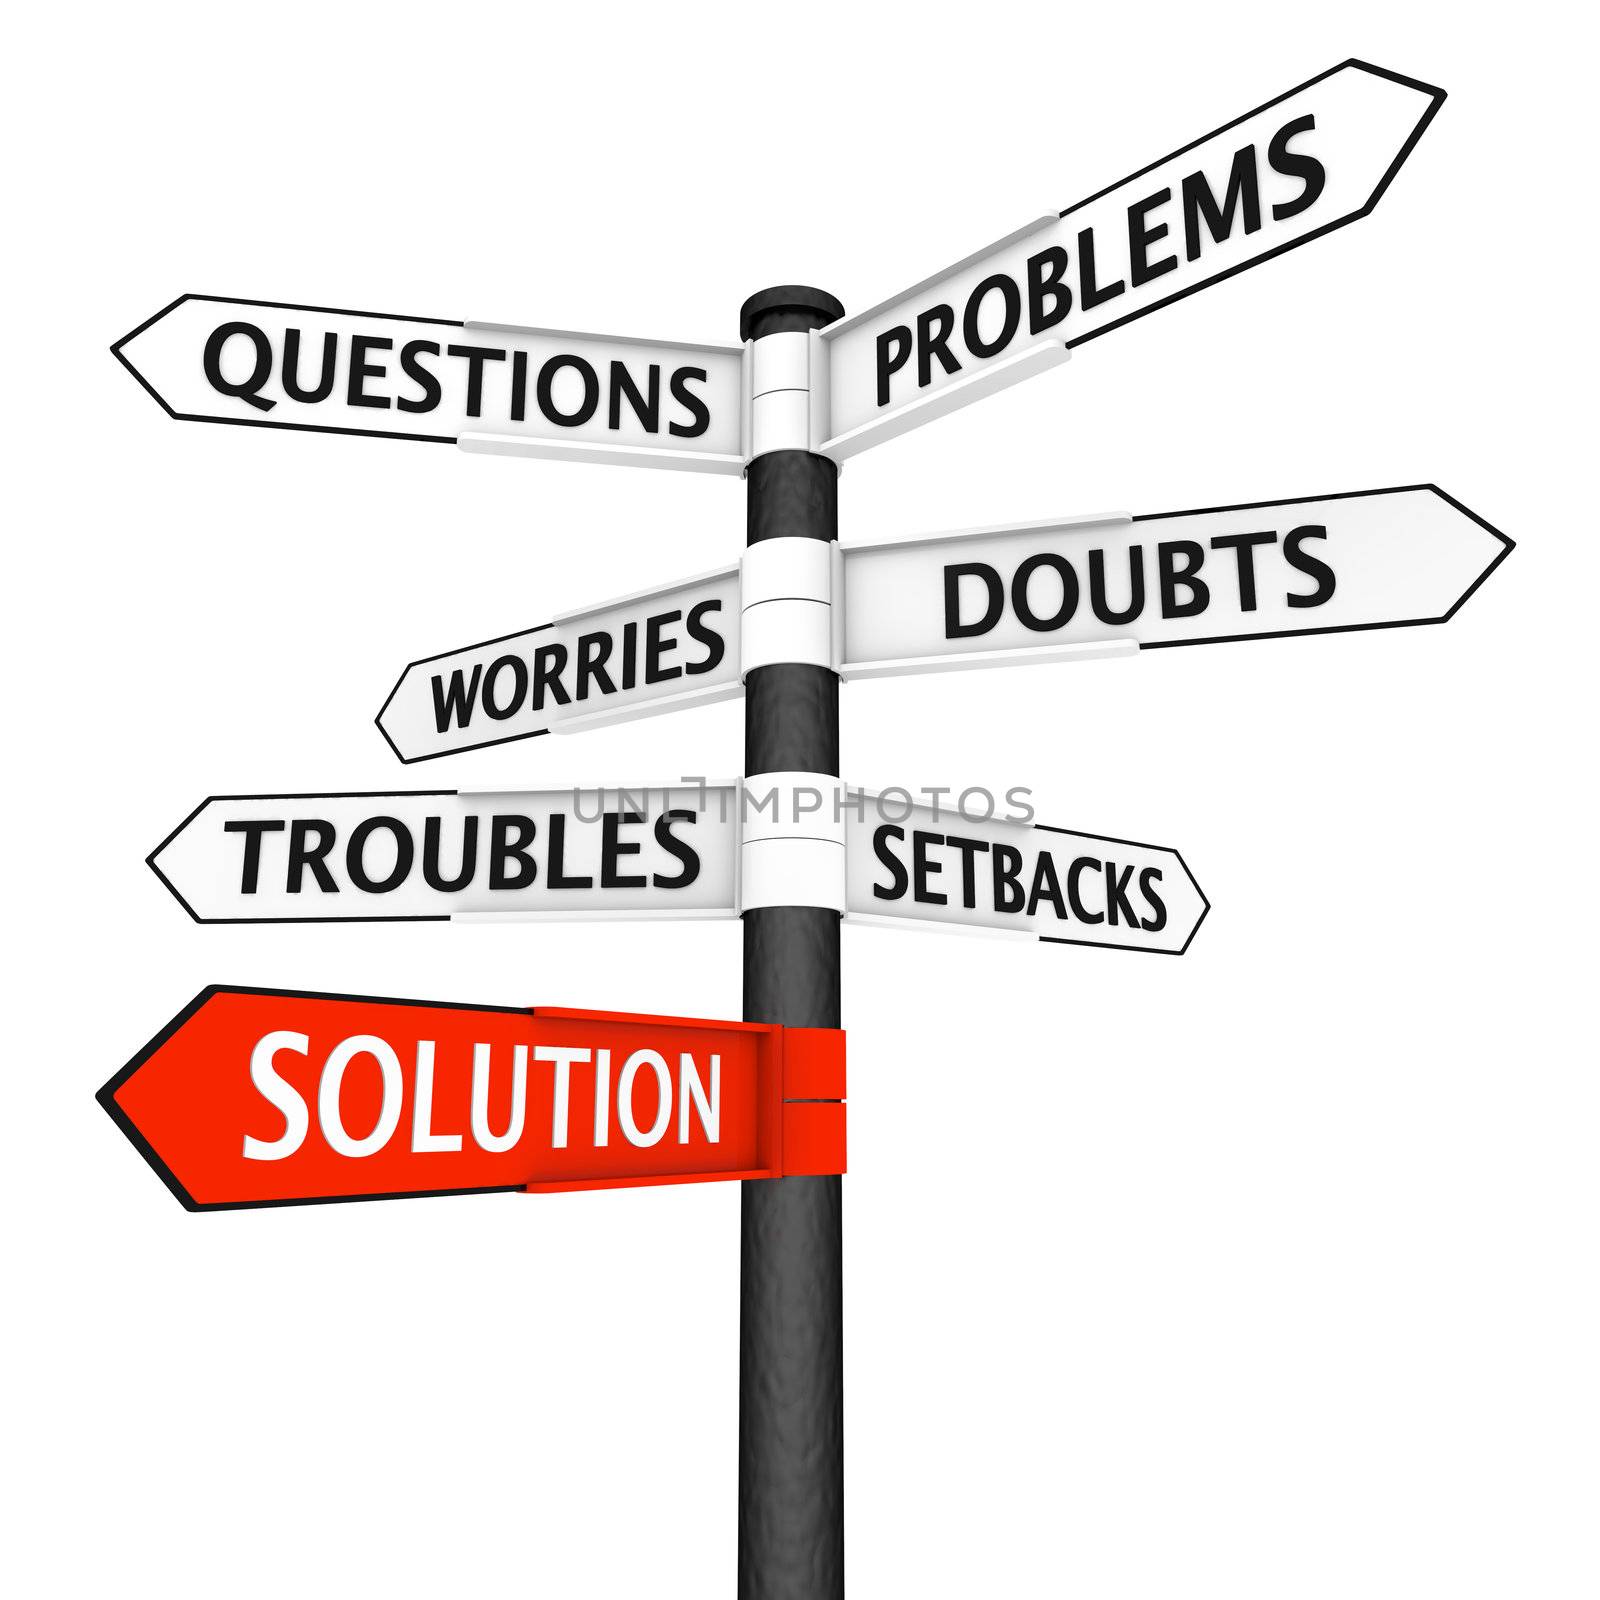 Problems and Solution Signpost by Harvepino